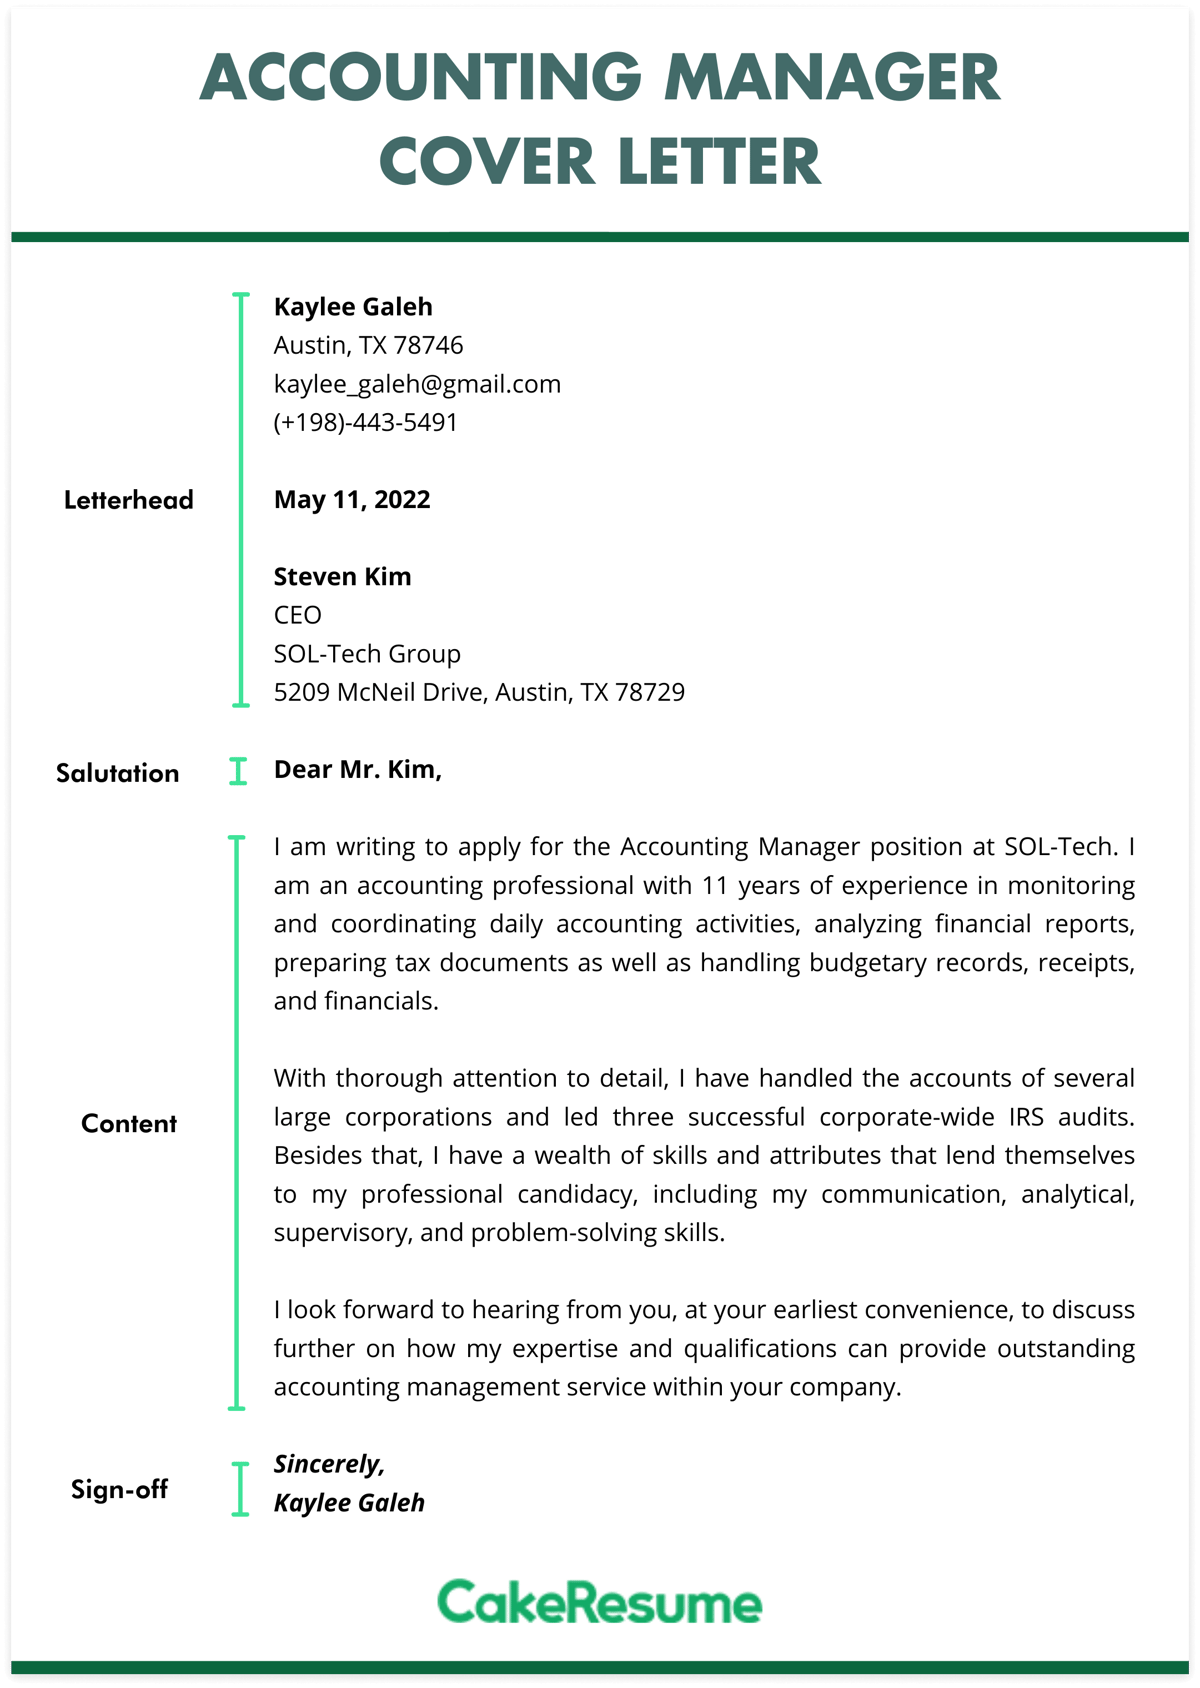 Accounting Cover Letter example